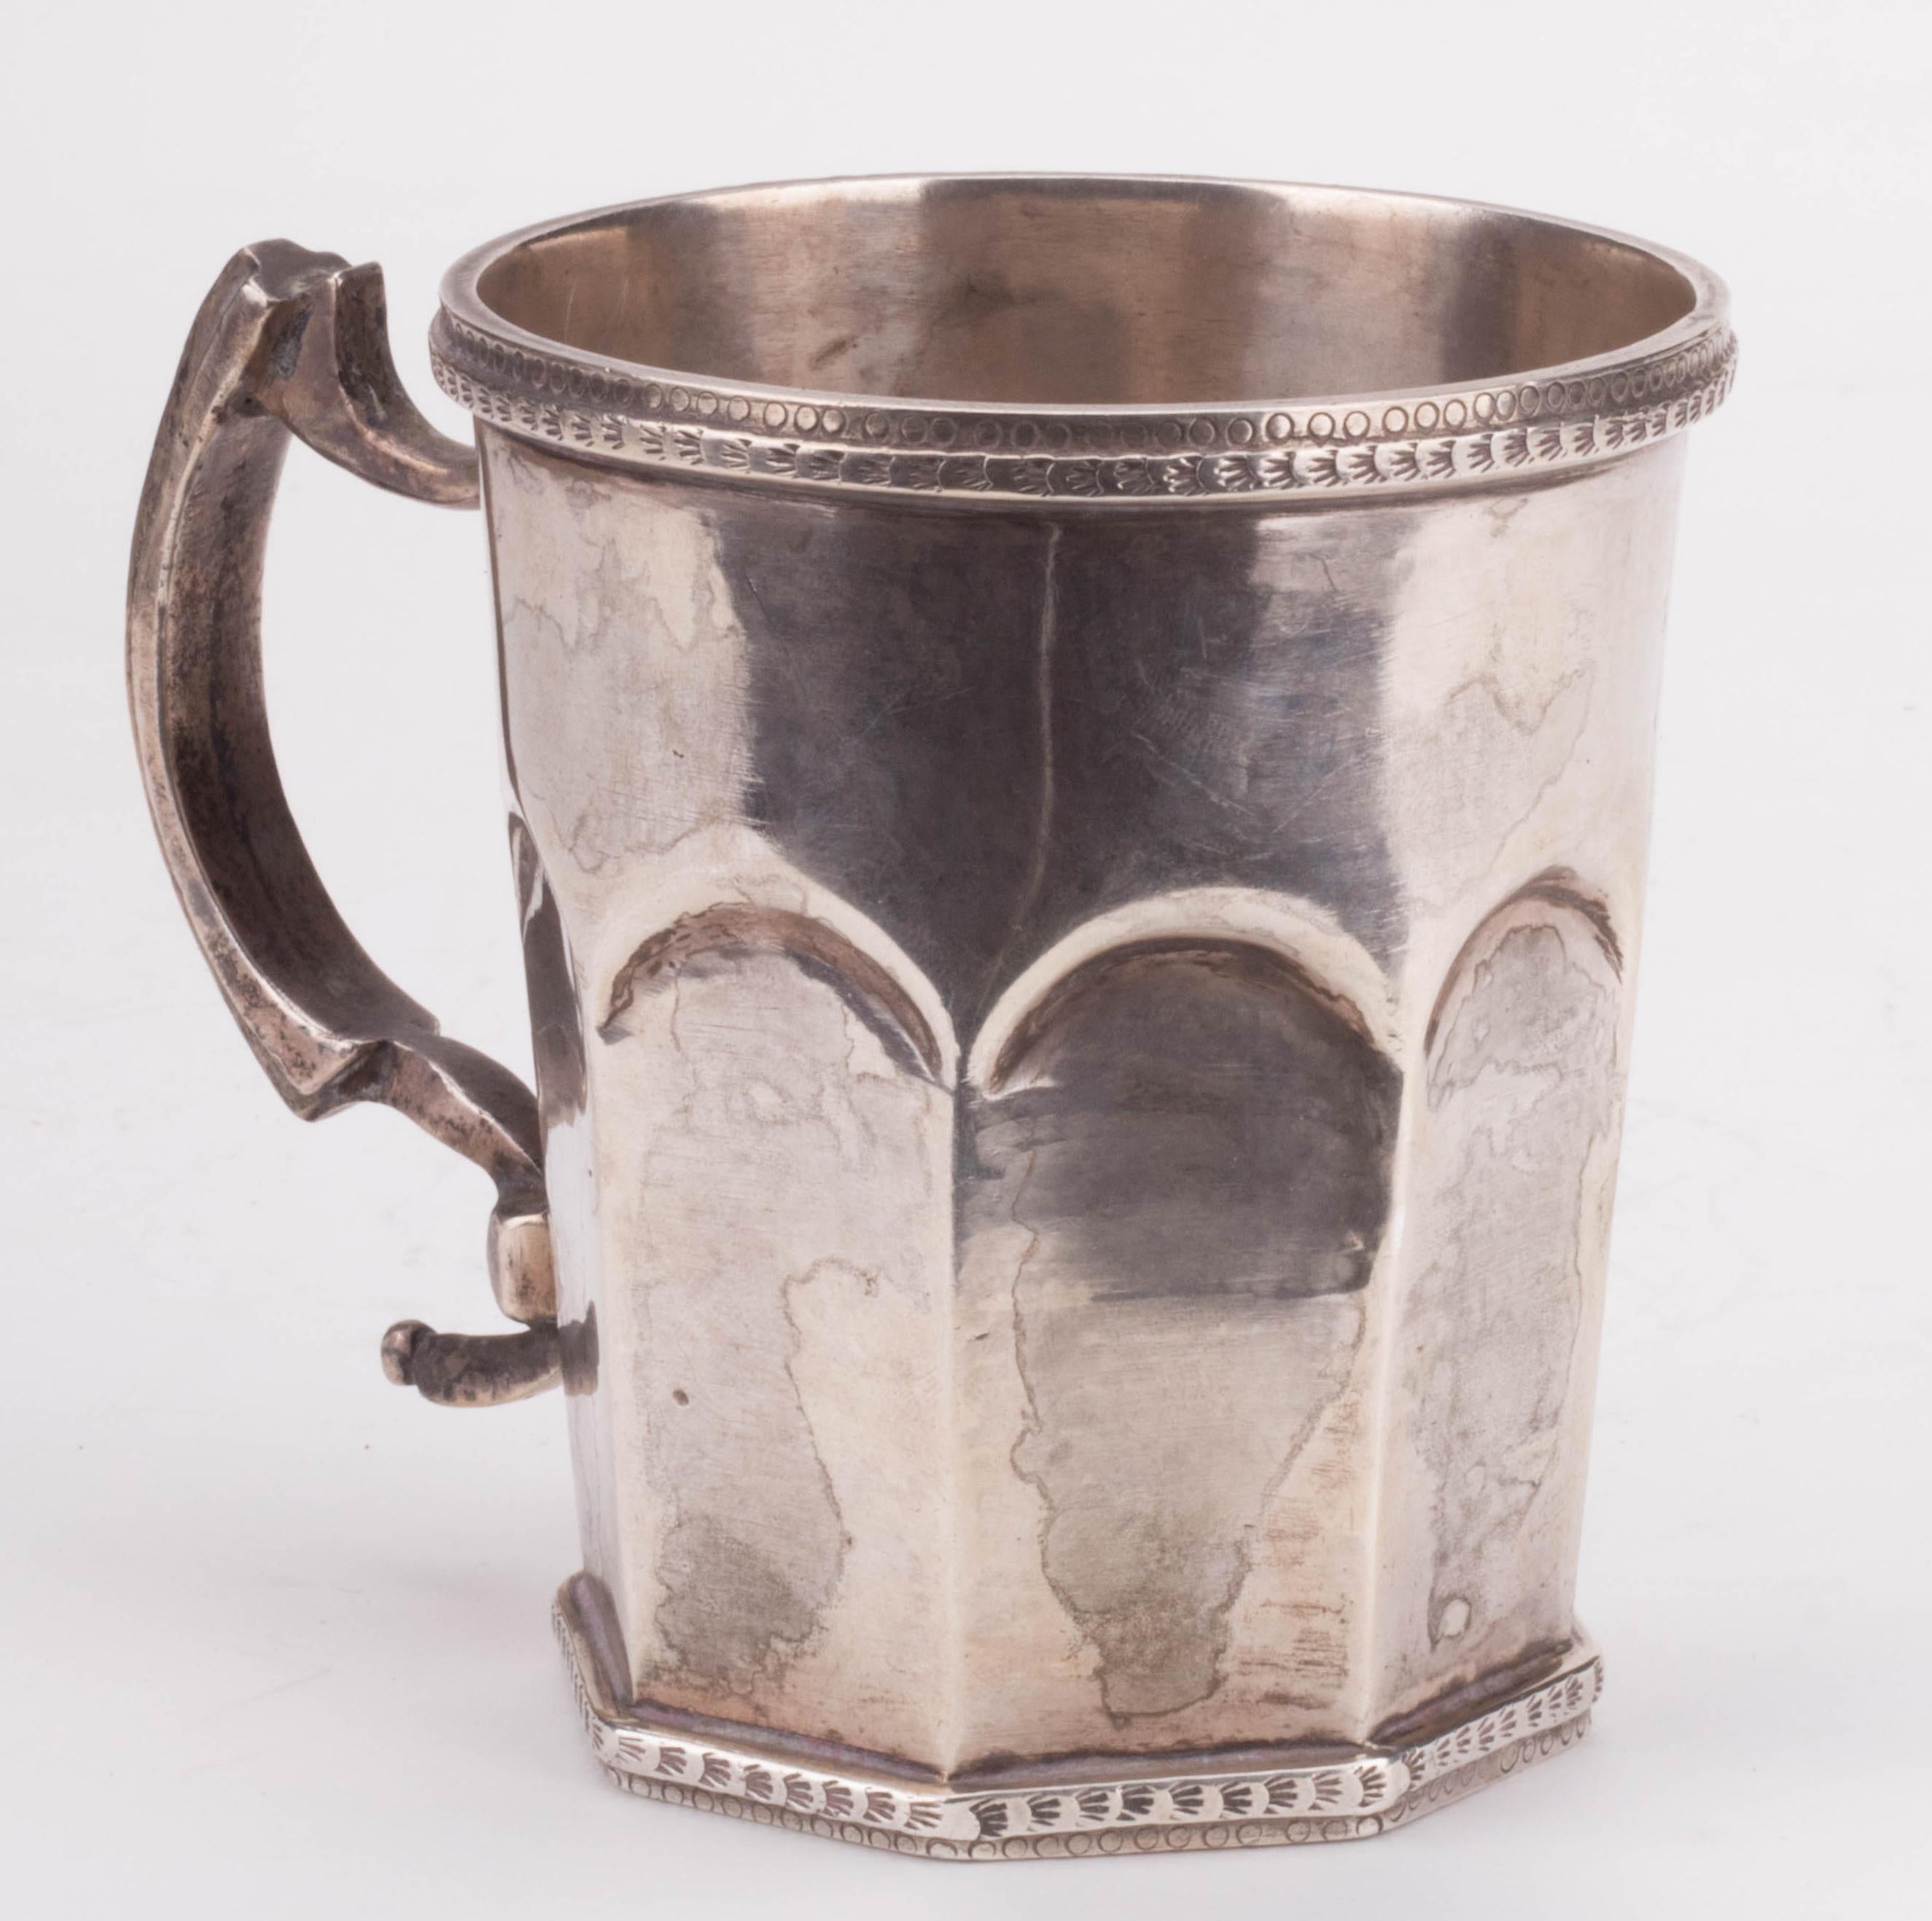 18th century Peruvian sterling silver jug with pearl decoration.

Silver by weight: 520 g.